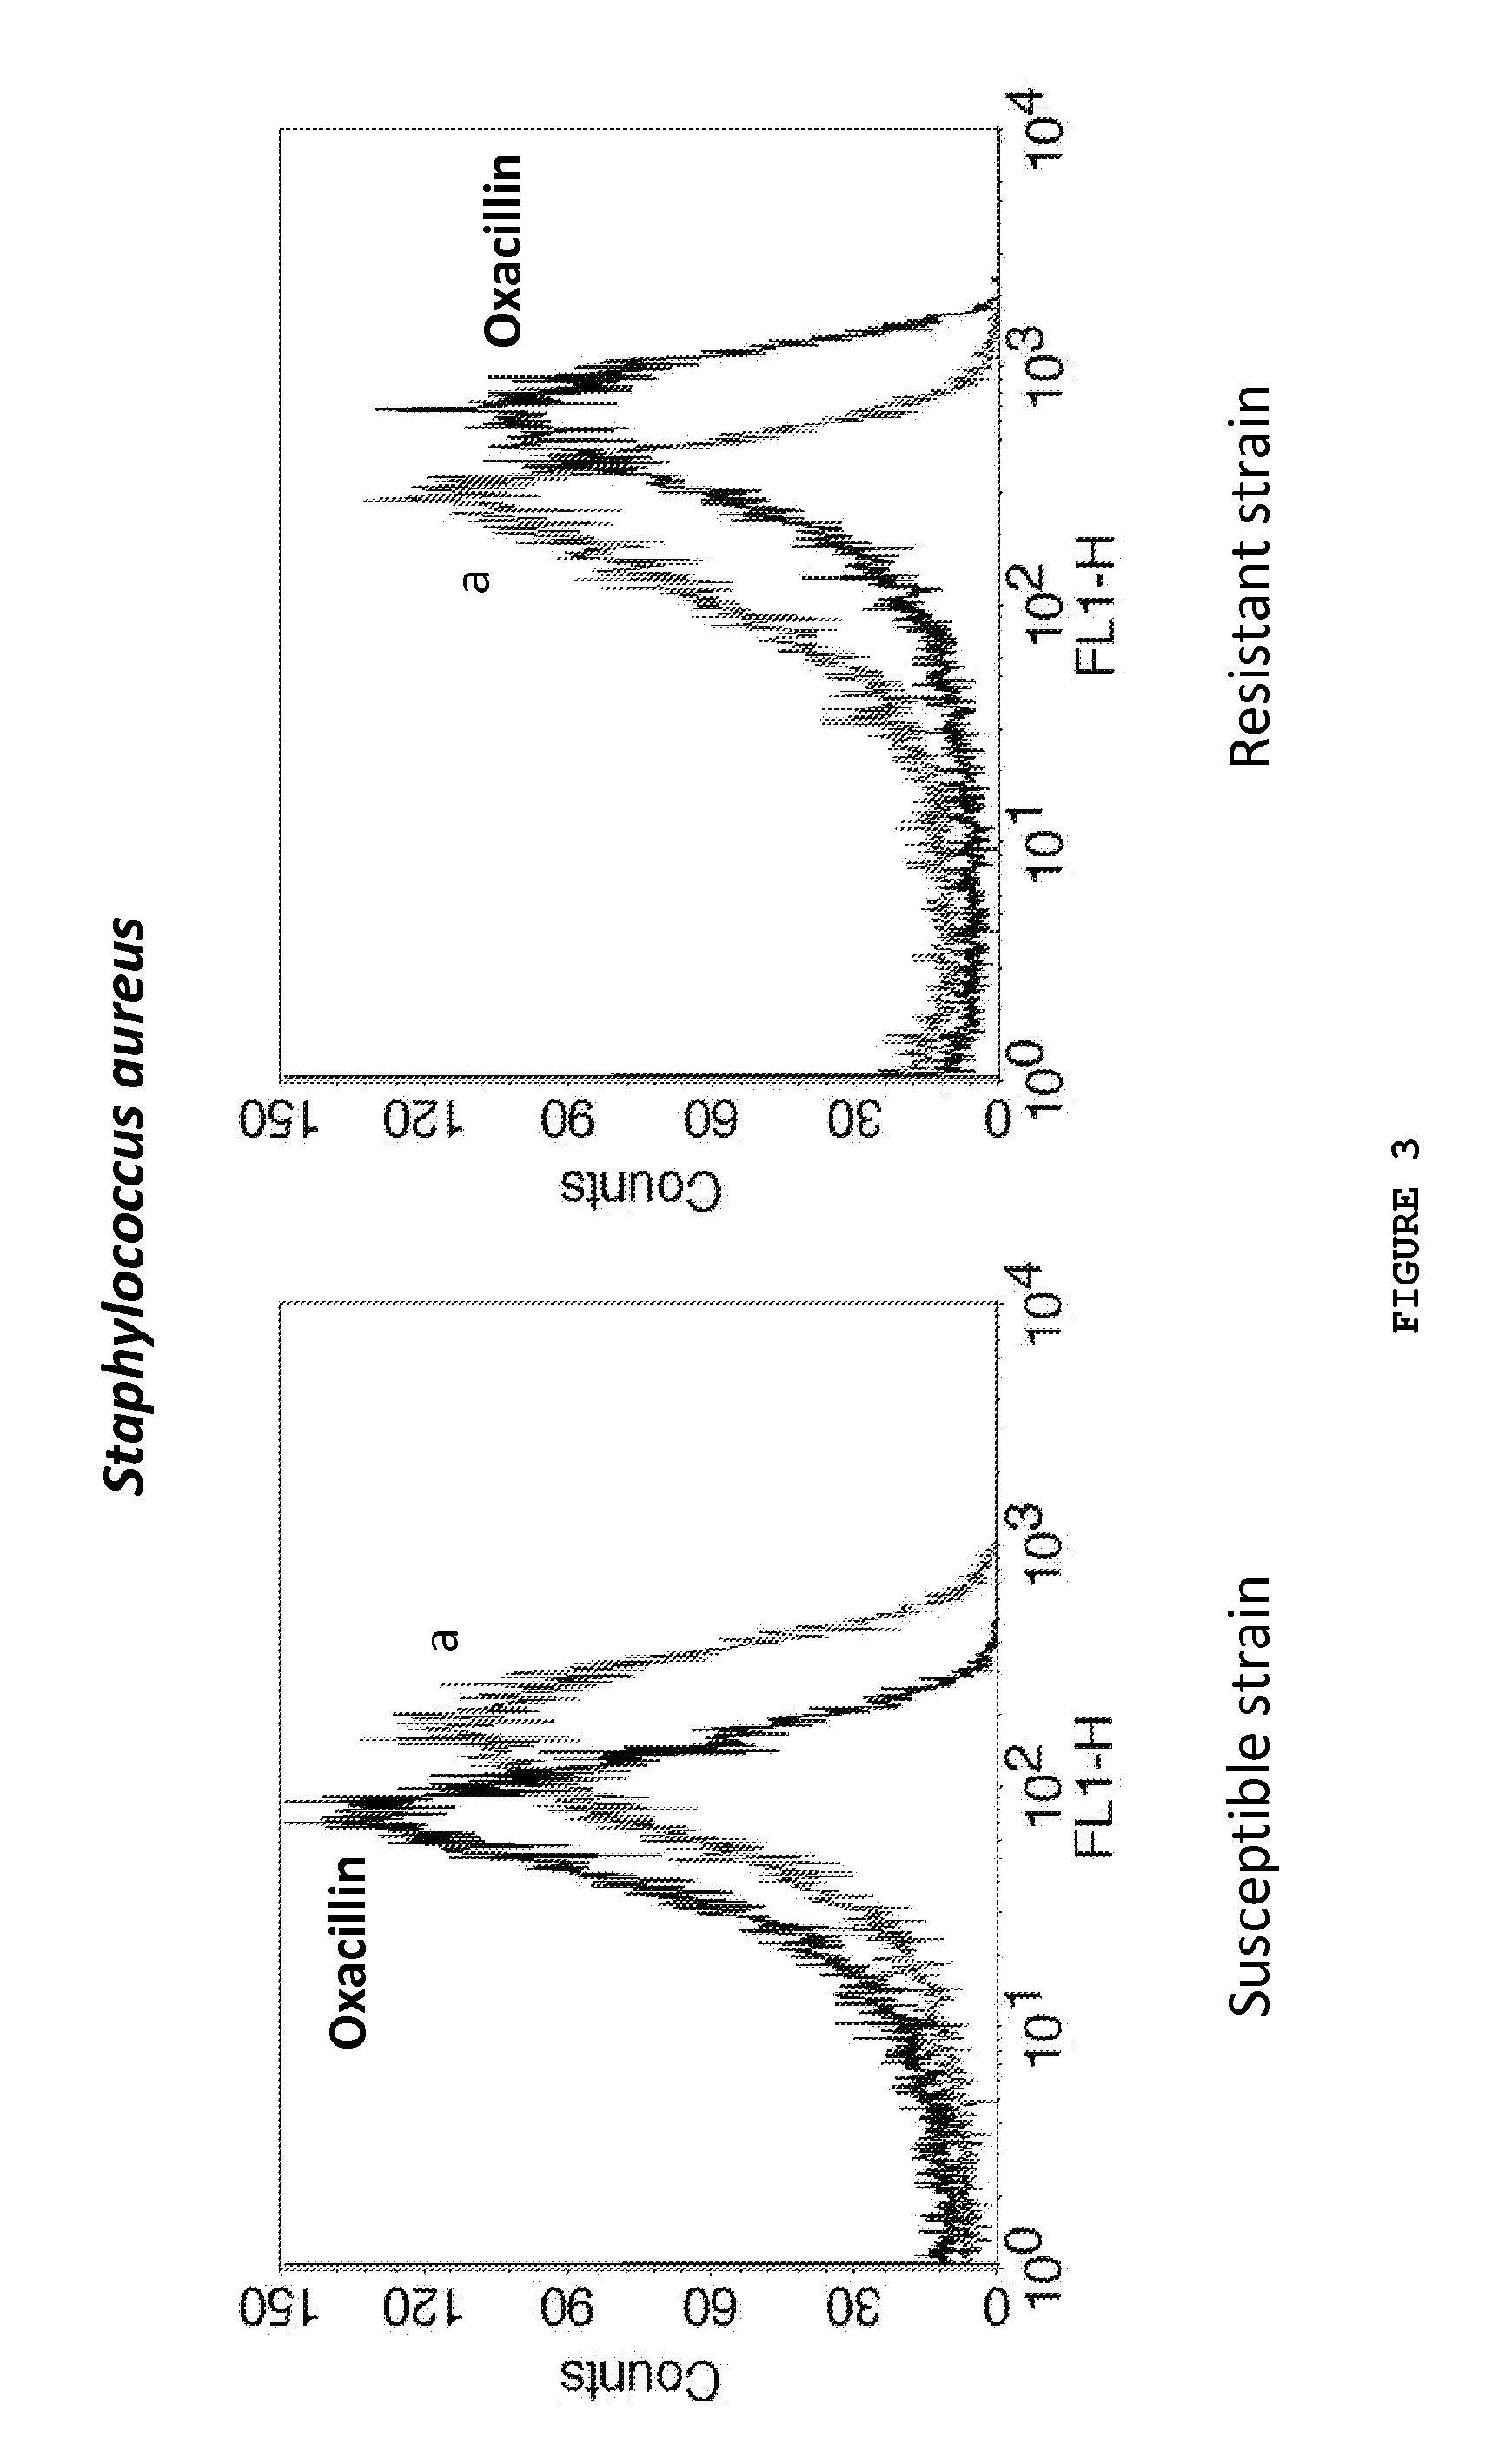 Kit and method of detecting the resistant microorganisms to a therapeutic agent